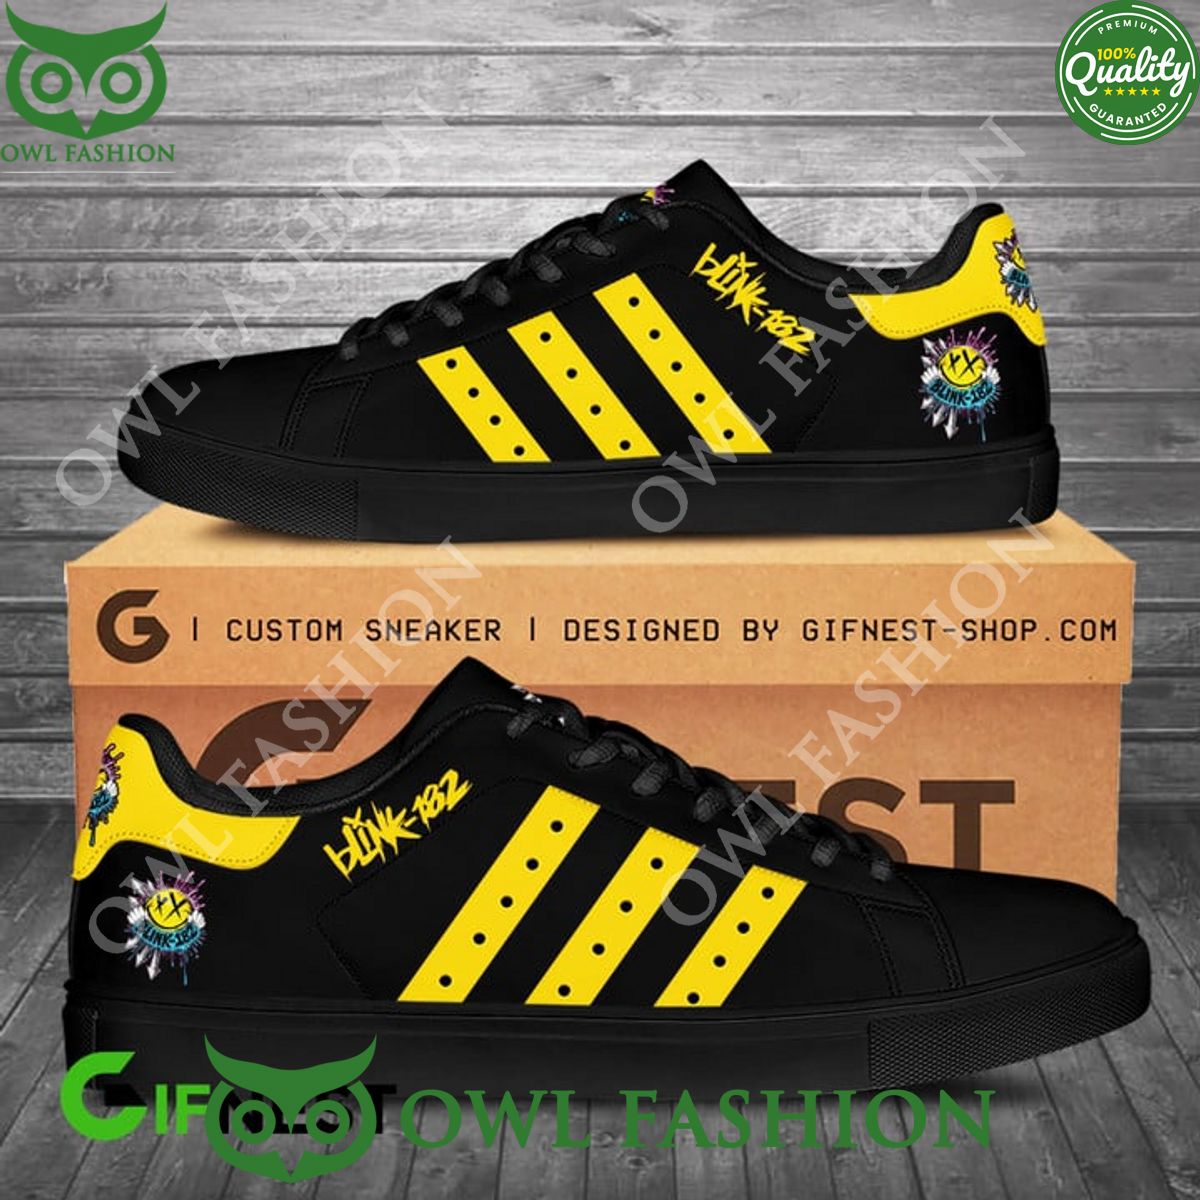 blink 182 black yellow stan smith low top shoes rock band 1 S1JWl.jpg